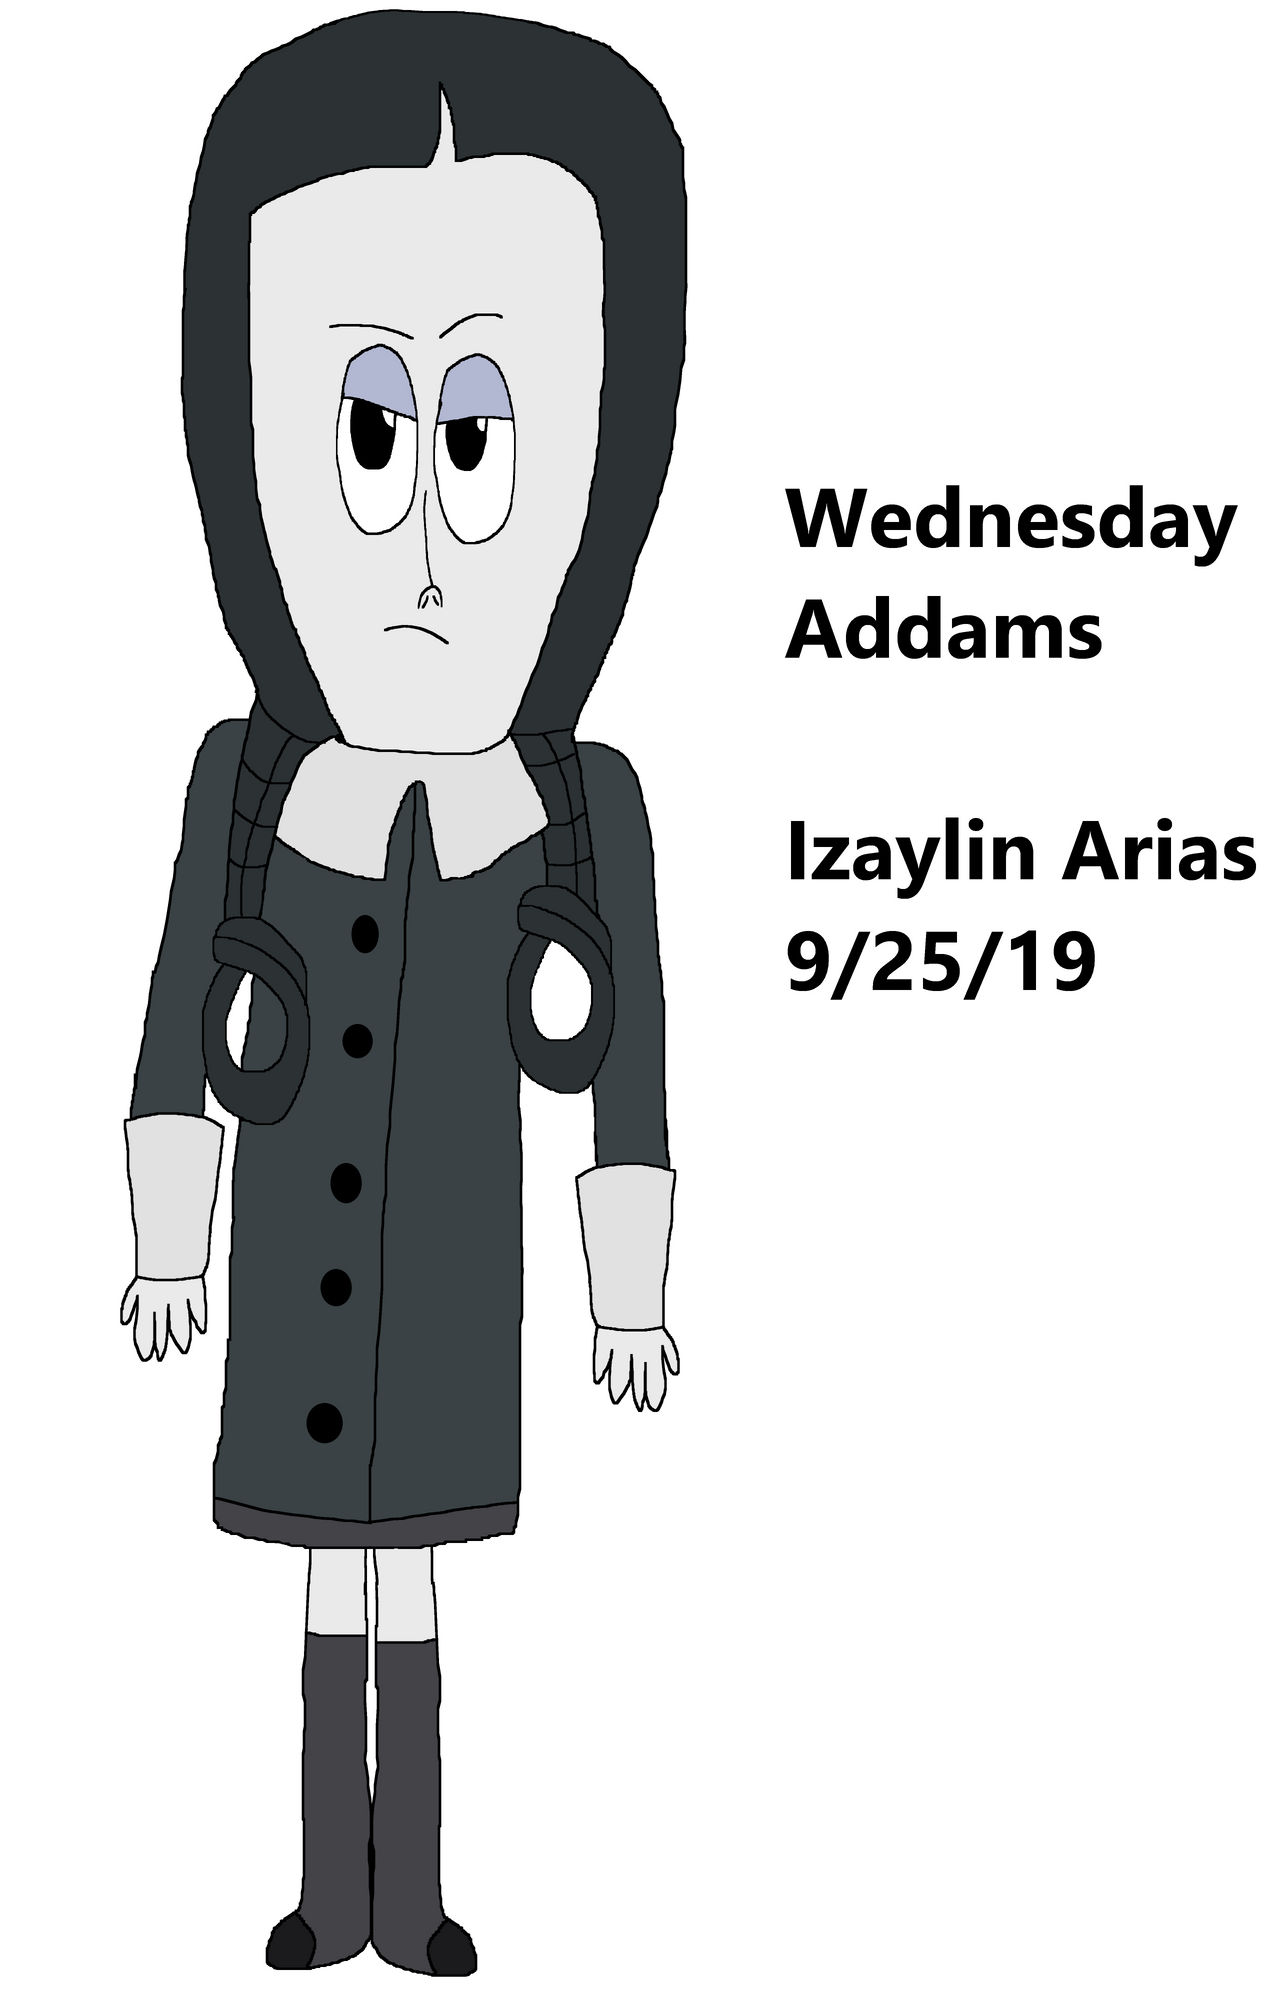 The Addams Family 2019 - Wednesday Addams by Jiro-the-Writer on DeviantArt